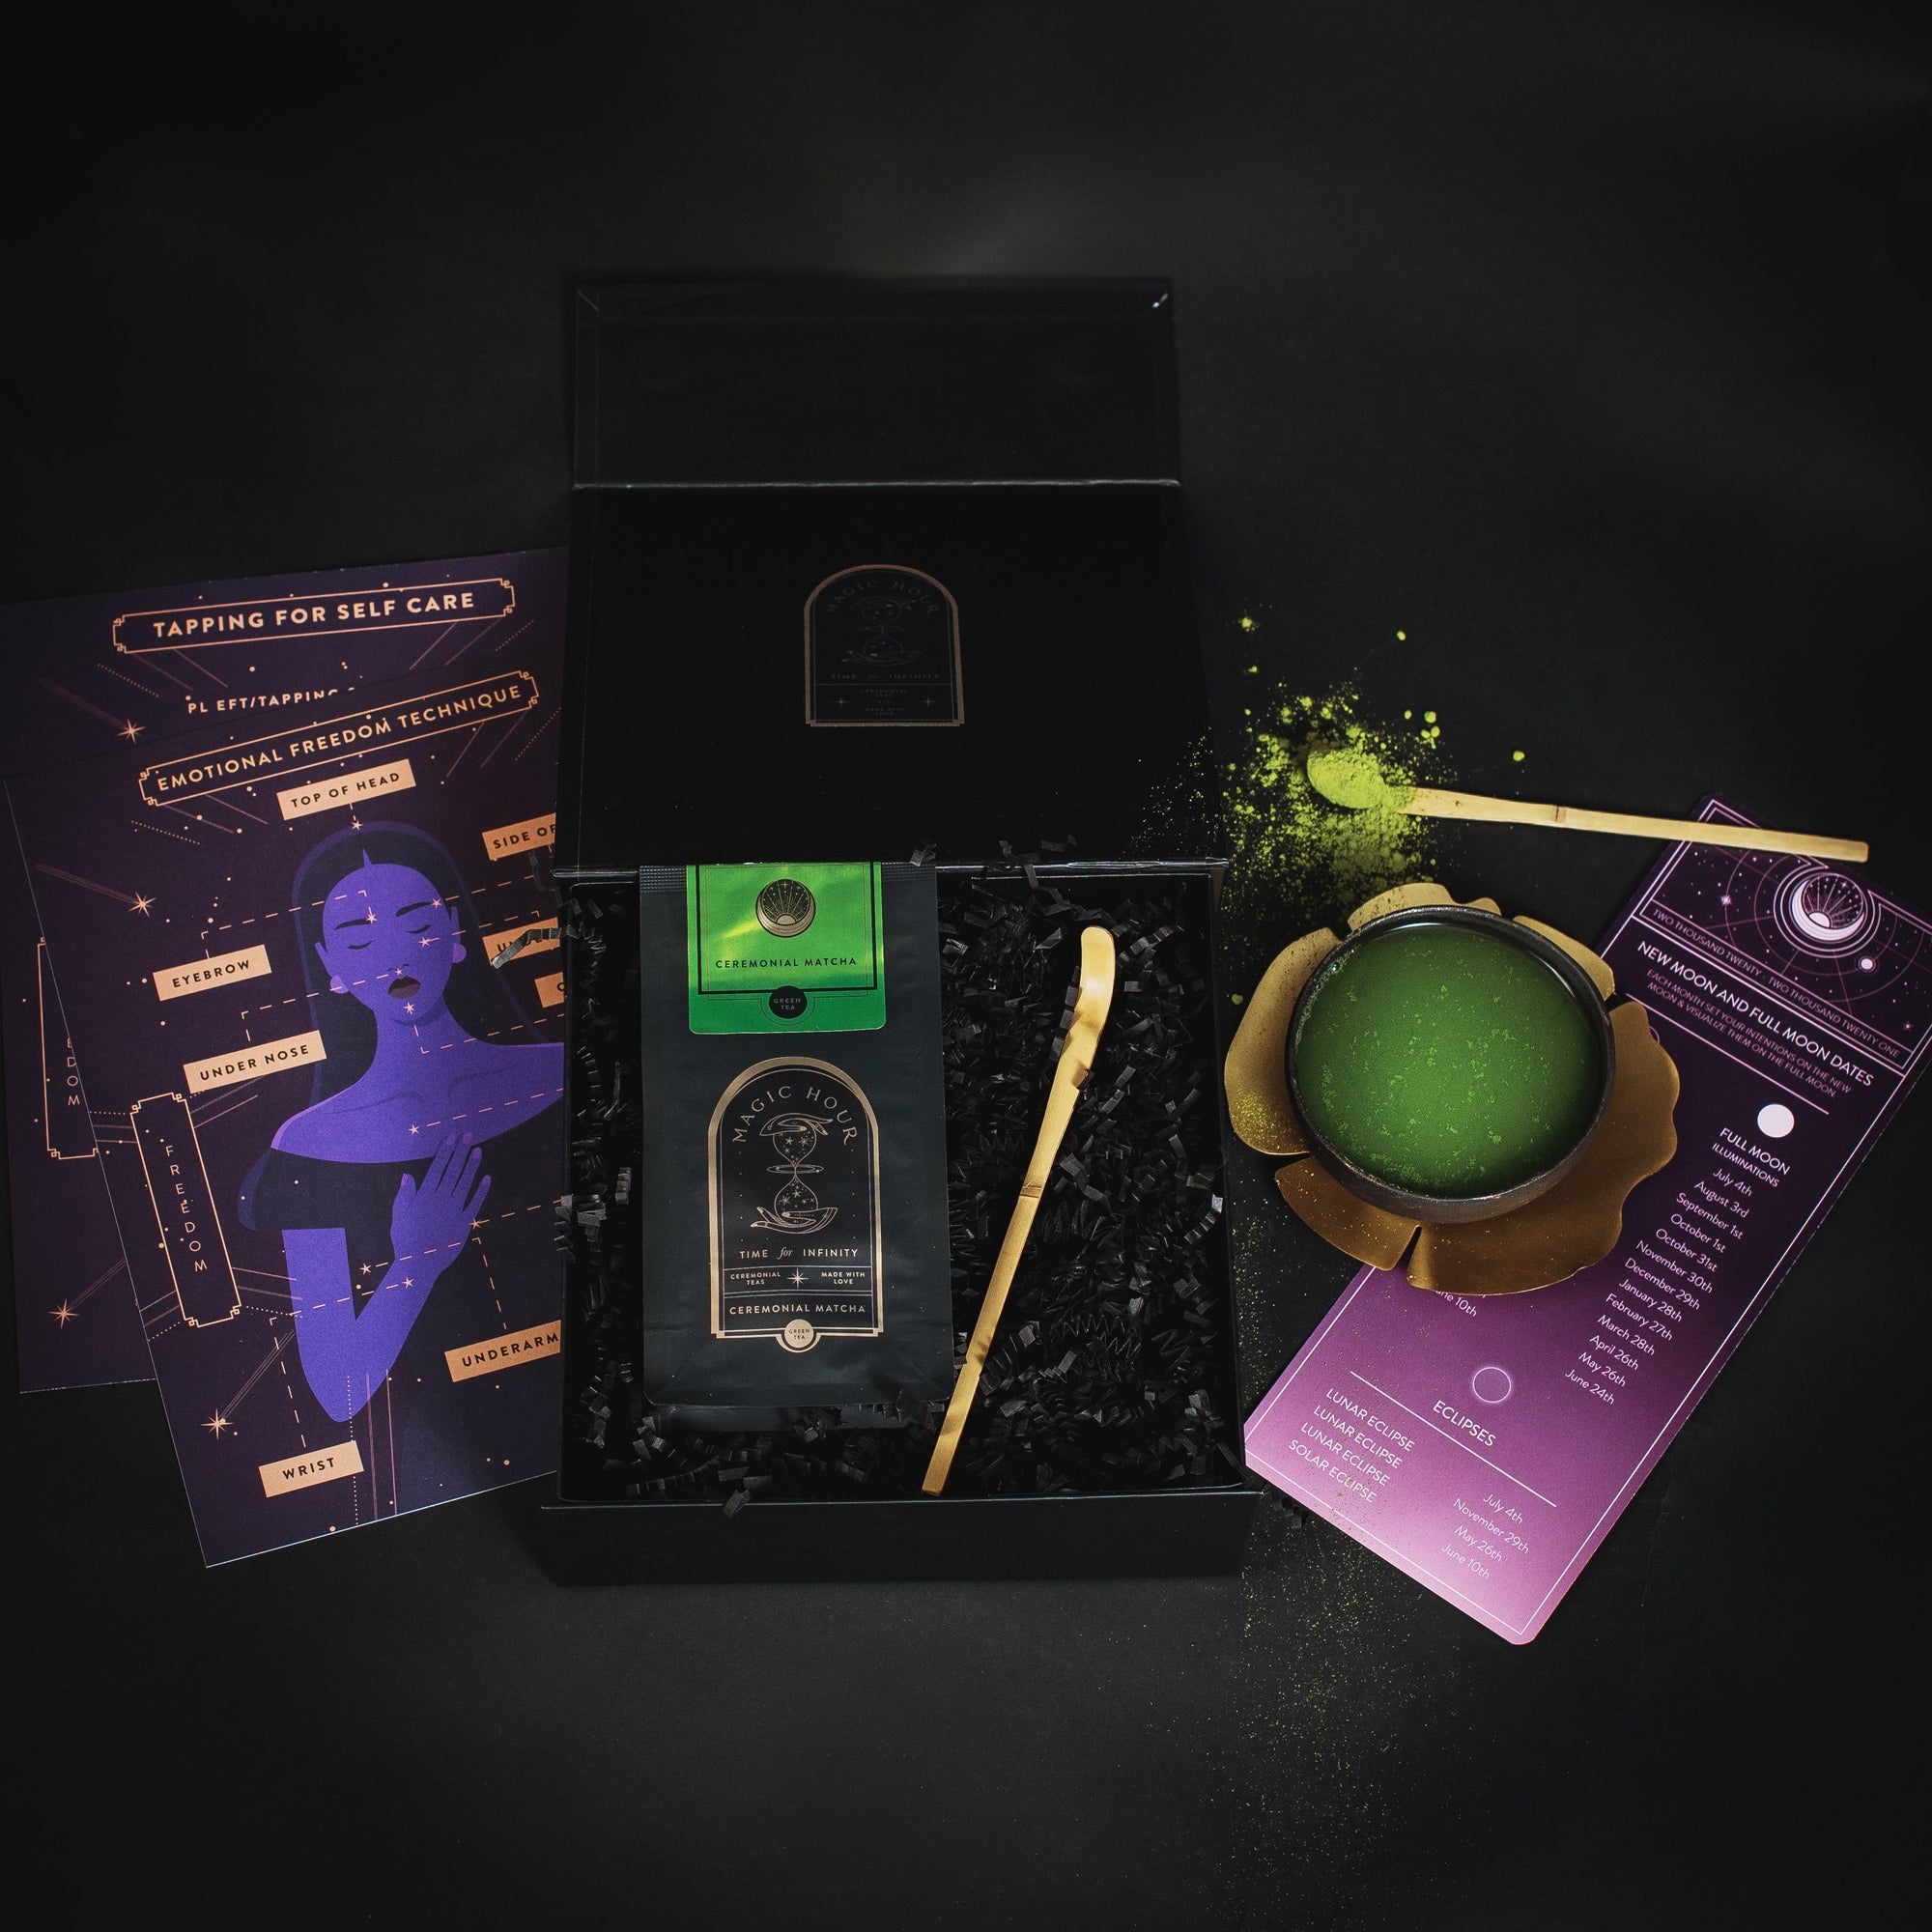 A self-care kit contains a black box filled with a green Ceremonial Matcha Freedom Box, a gold spoon, black crinkle paper, and informational cards with purple and gold designs. The cards have illustrations and text related to self-care and emotional well-being. Additionally, the kit features Magic Hour loose leaf tea to enhance your relaxation rituals.